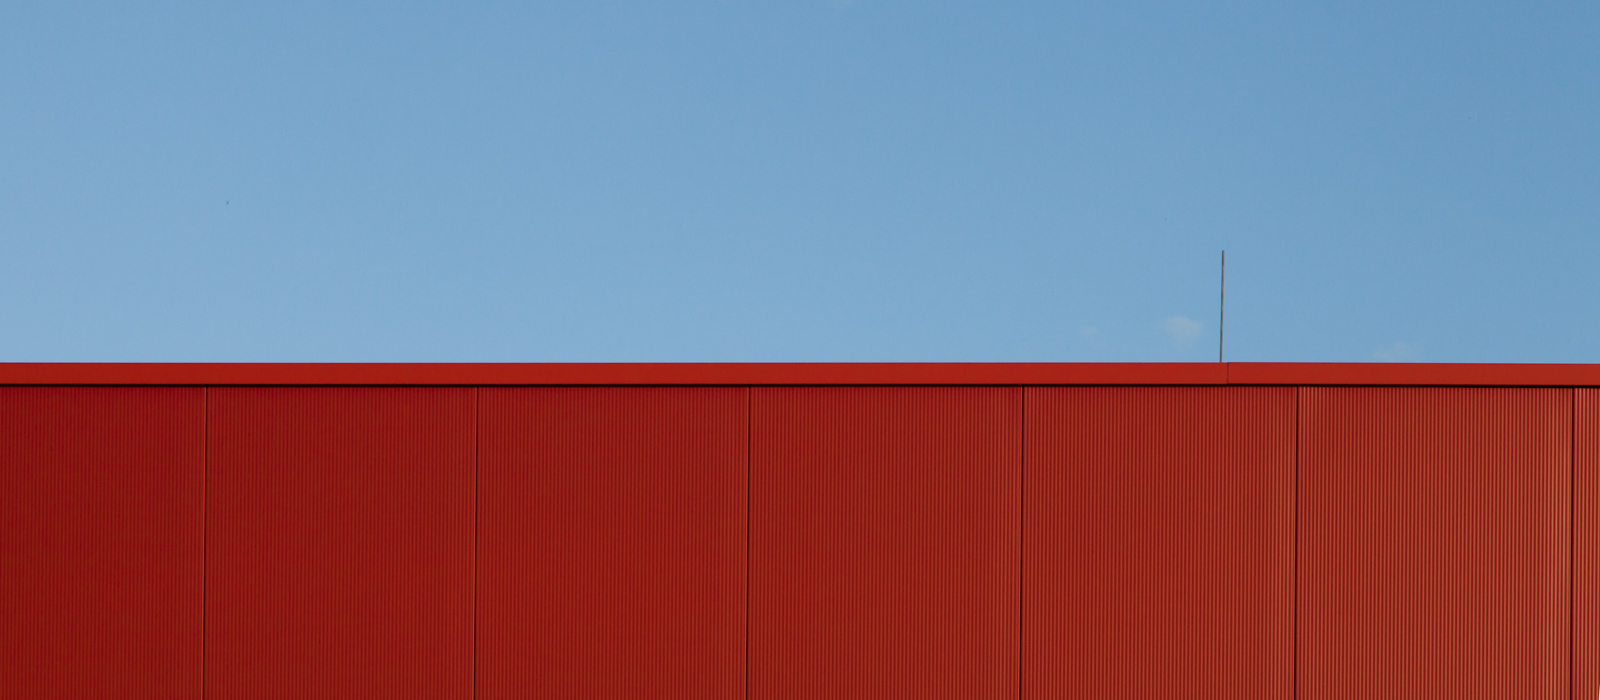 minimalistic horizontal image, seeming two-dimensional, showing a red steel wall with an antenna against the blue sky